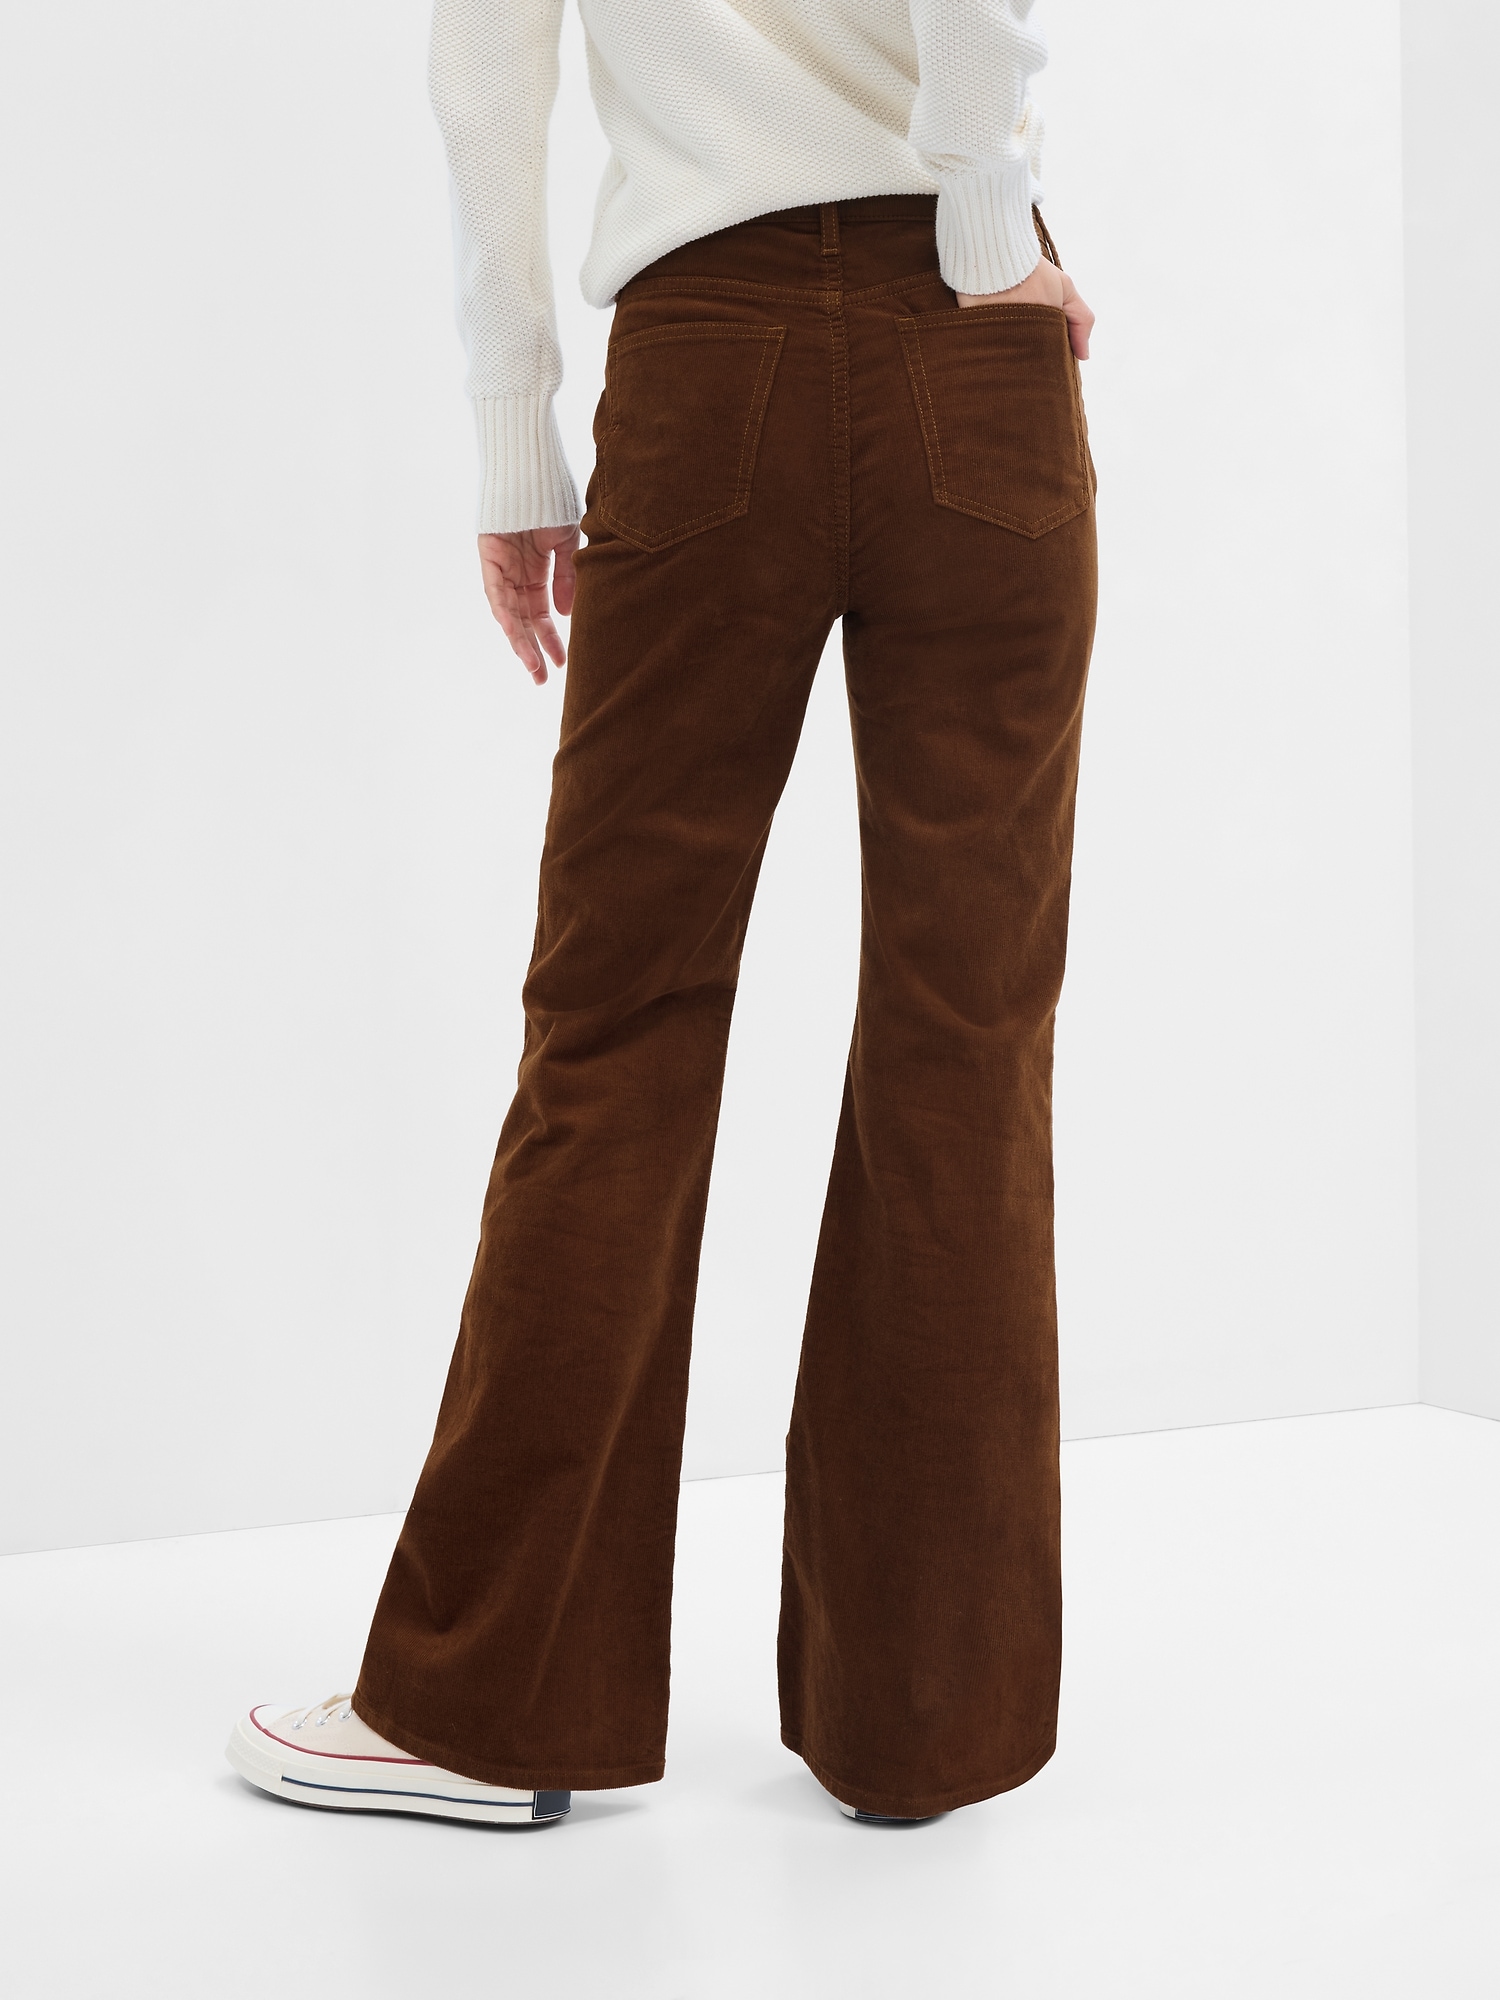 Men 60S 70S Slim Stretch Corduroy Bell Bottom Flared Pants Bootcut Long  Trousers